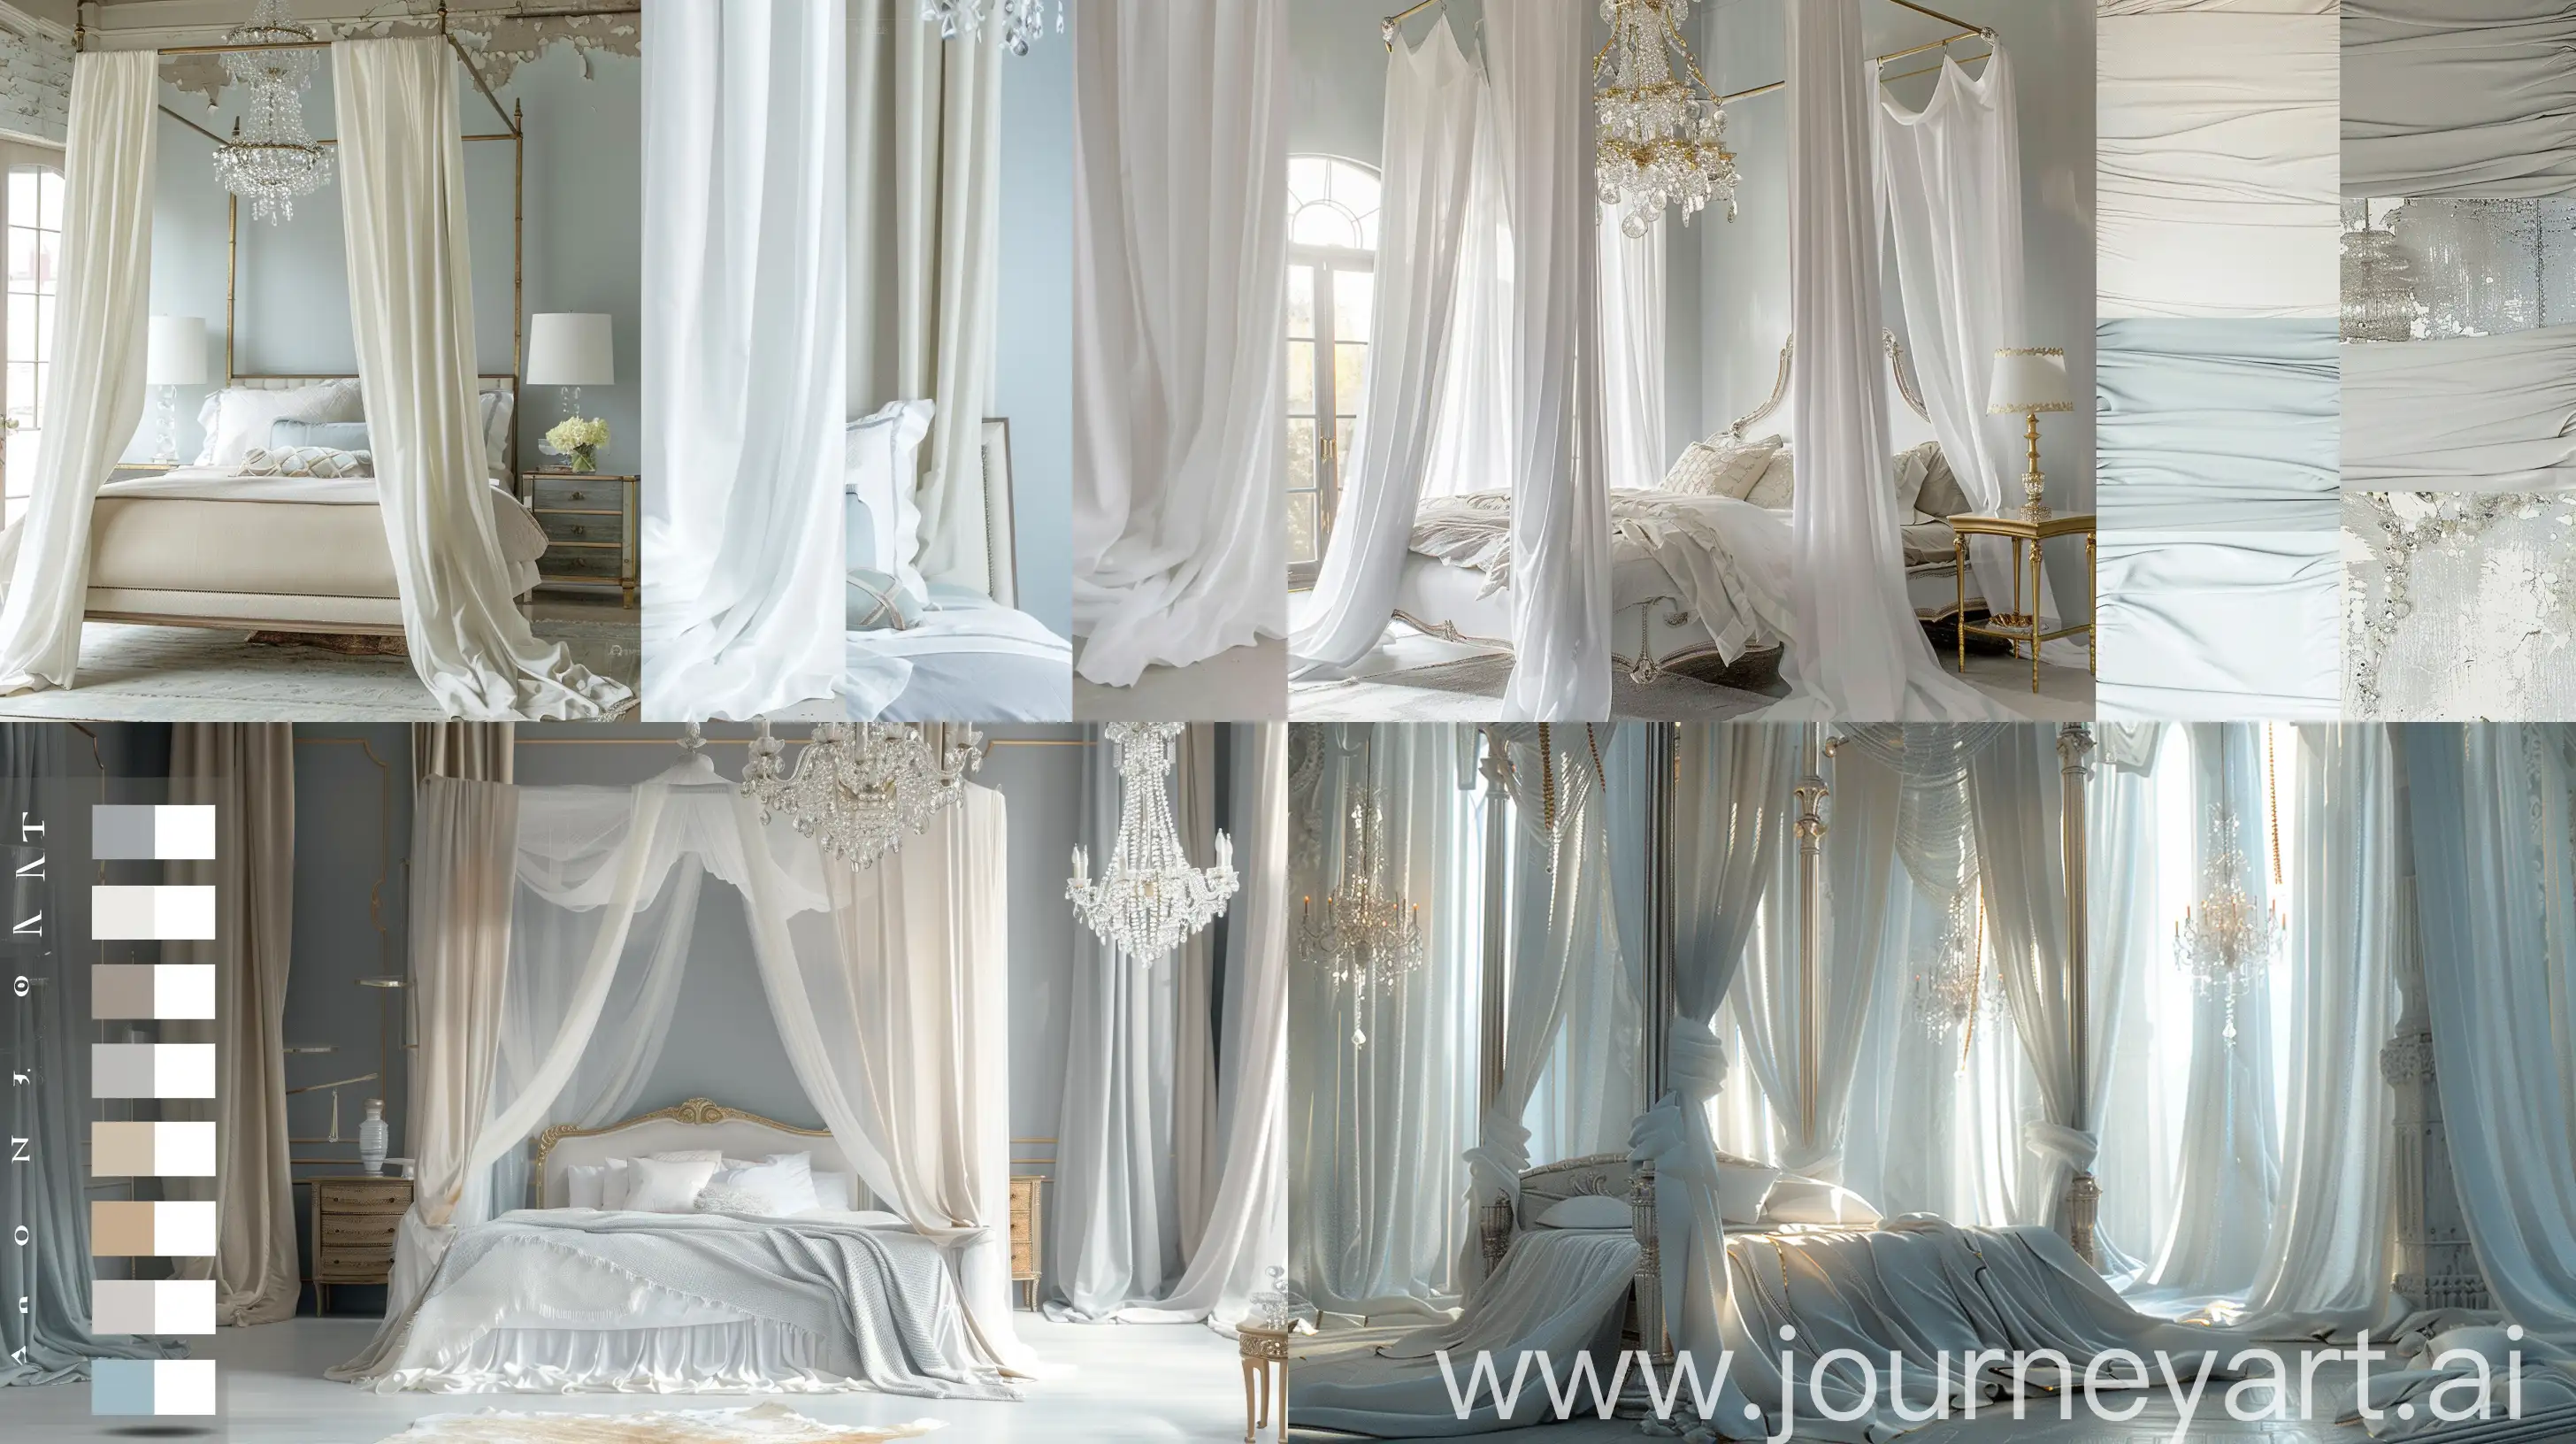 Drift into dreamland in a serene bedroom retreat, featuring a canopy bed draped in flowing white curtains. The color palette is a soothing mix of soft greys, pale blues, and touches of gold. Crystal chandeliers cast a gentle glow. --ar 16:9